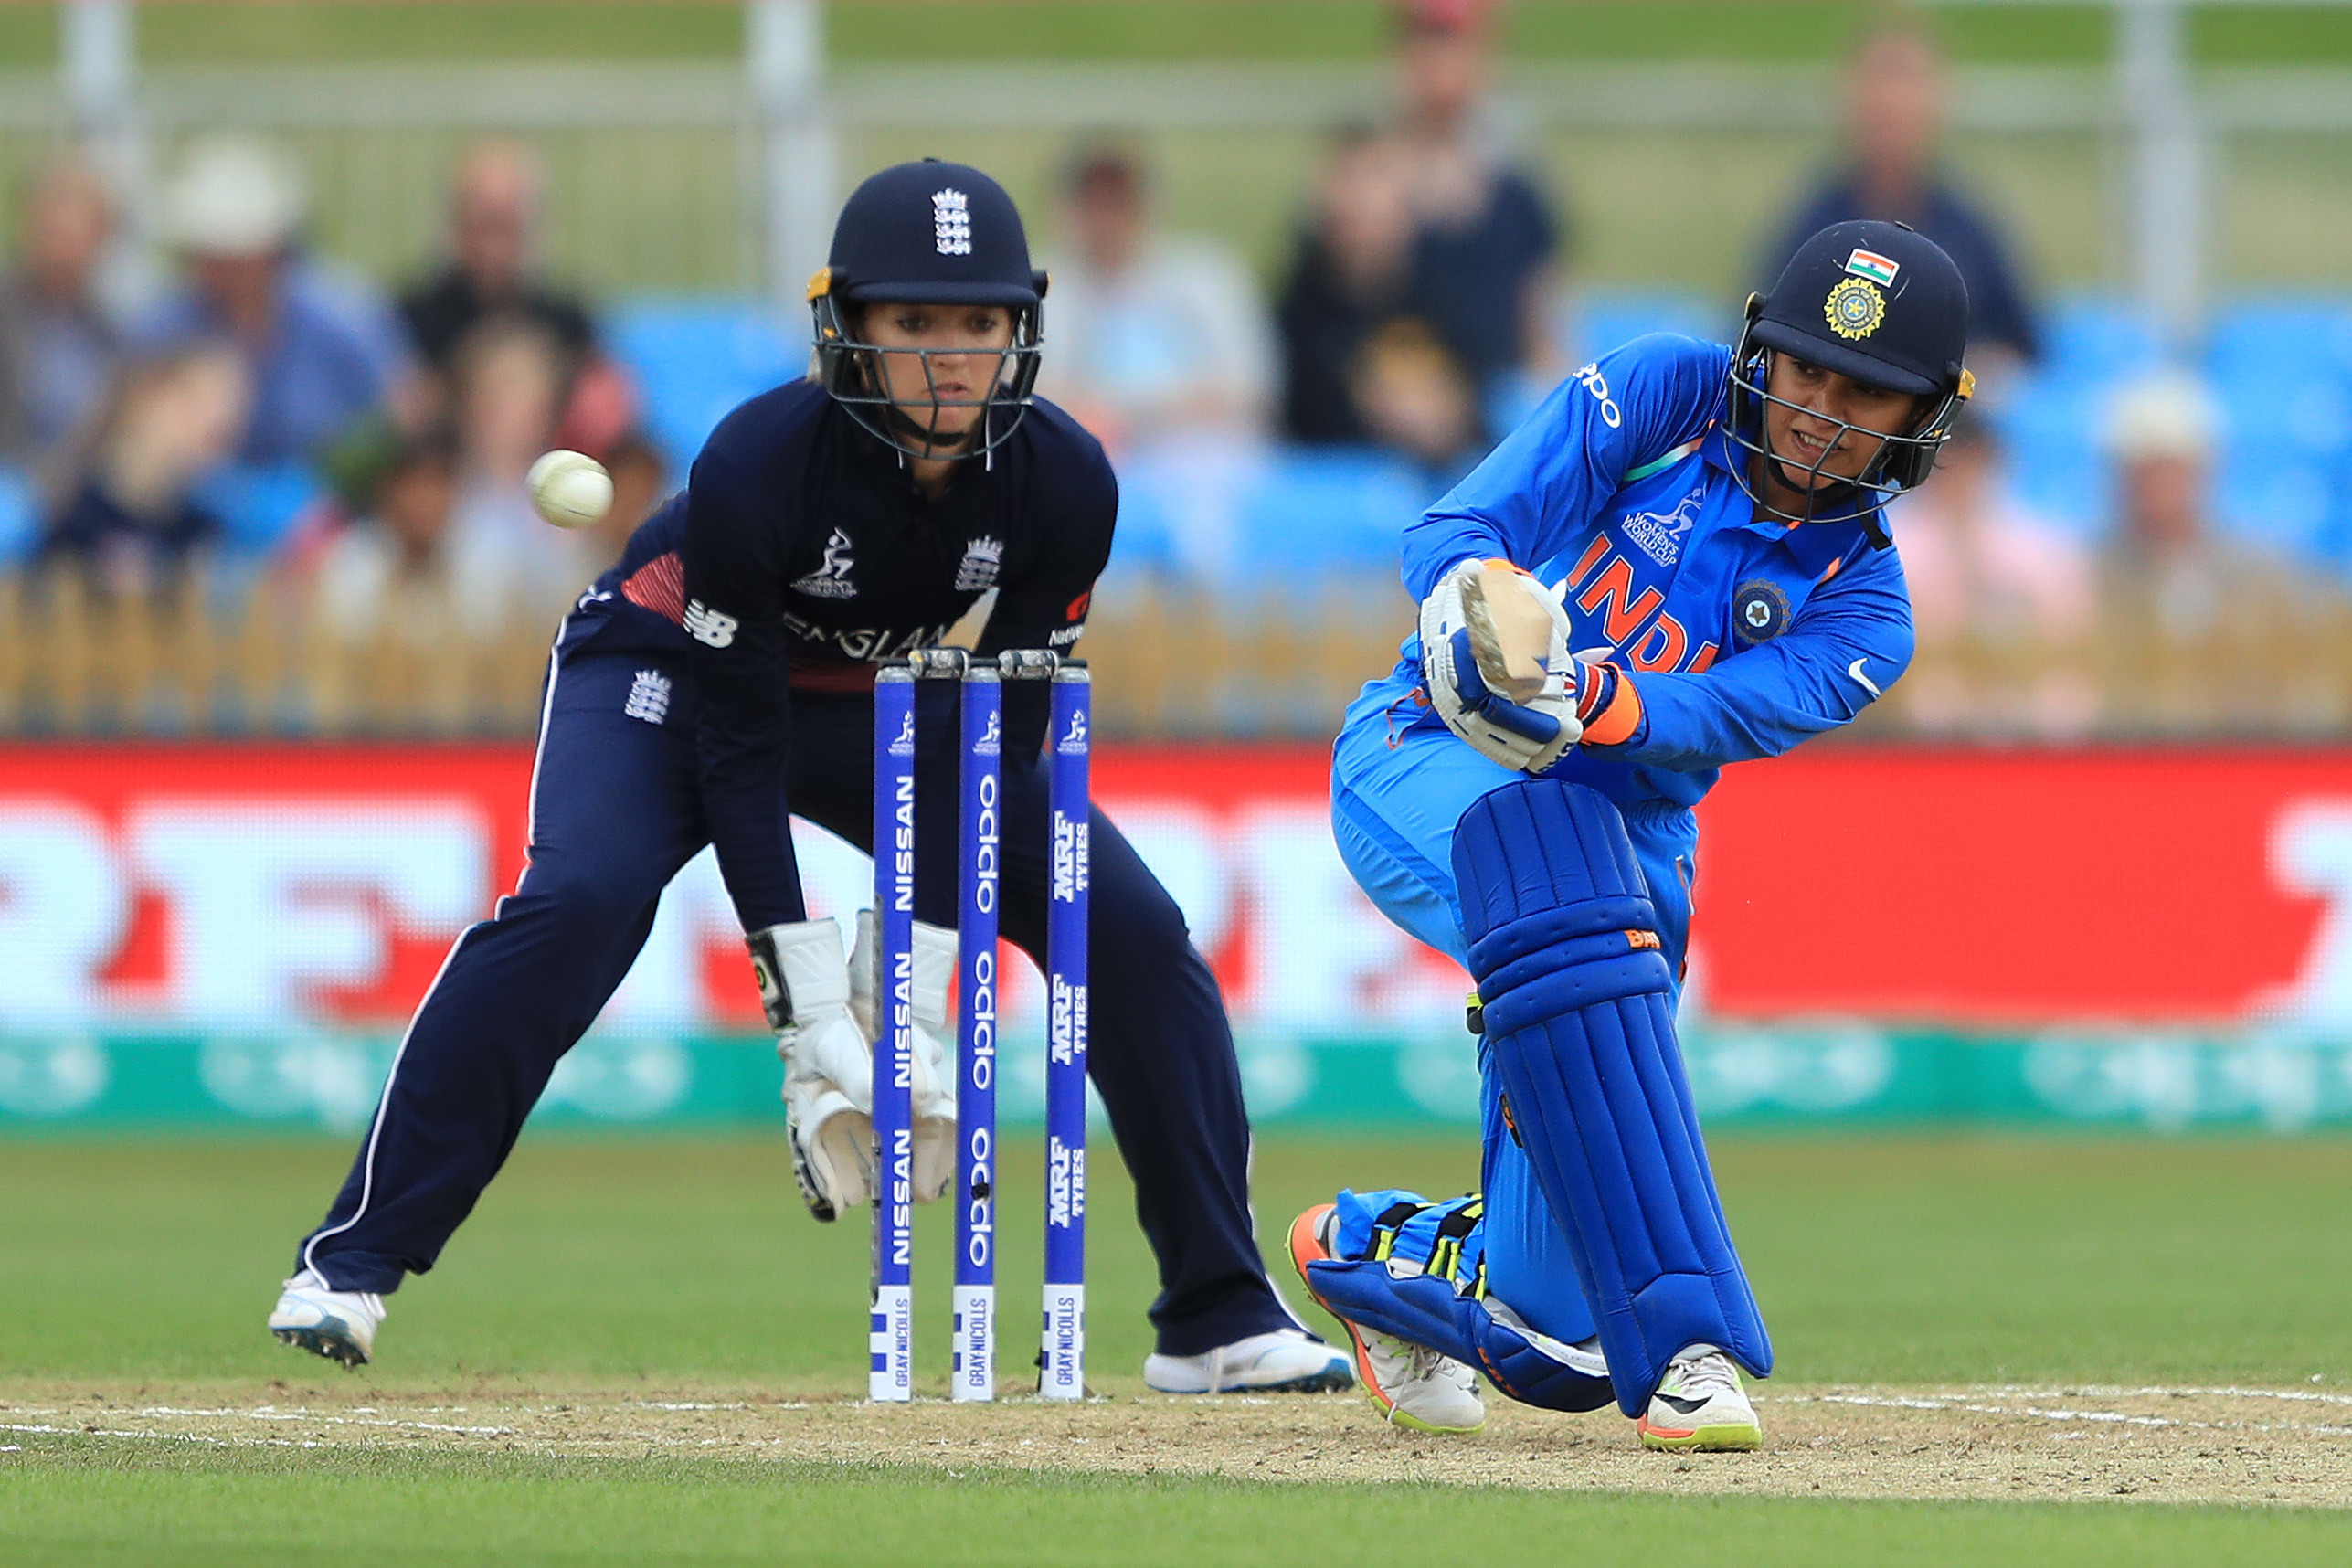 ICC T20 Rankings | Smriti Mandhana rises to fourth, Jemimah Rodrigues drops to seventh position